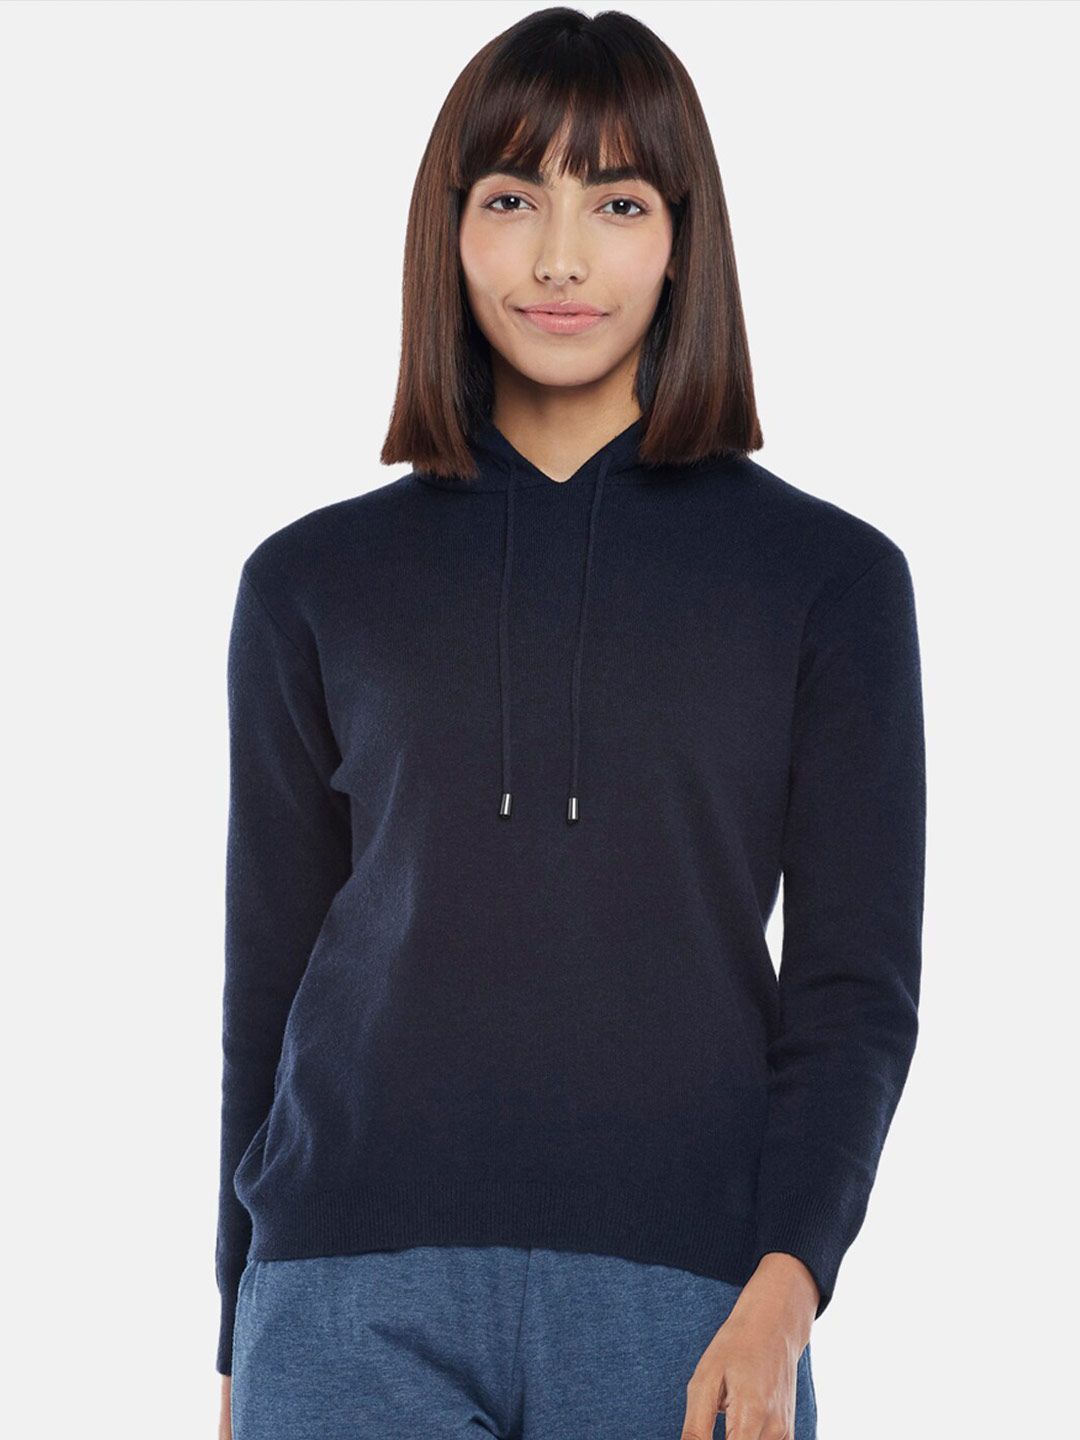 Dreamz by Pantaloons Women Navy Blue Hooded Lounge Top Price in India